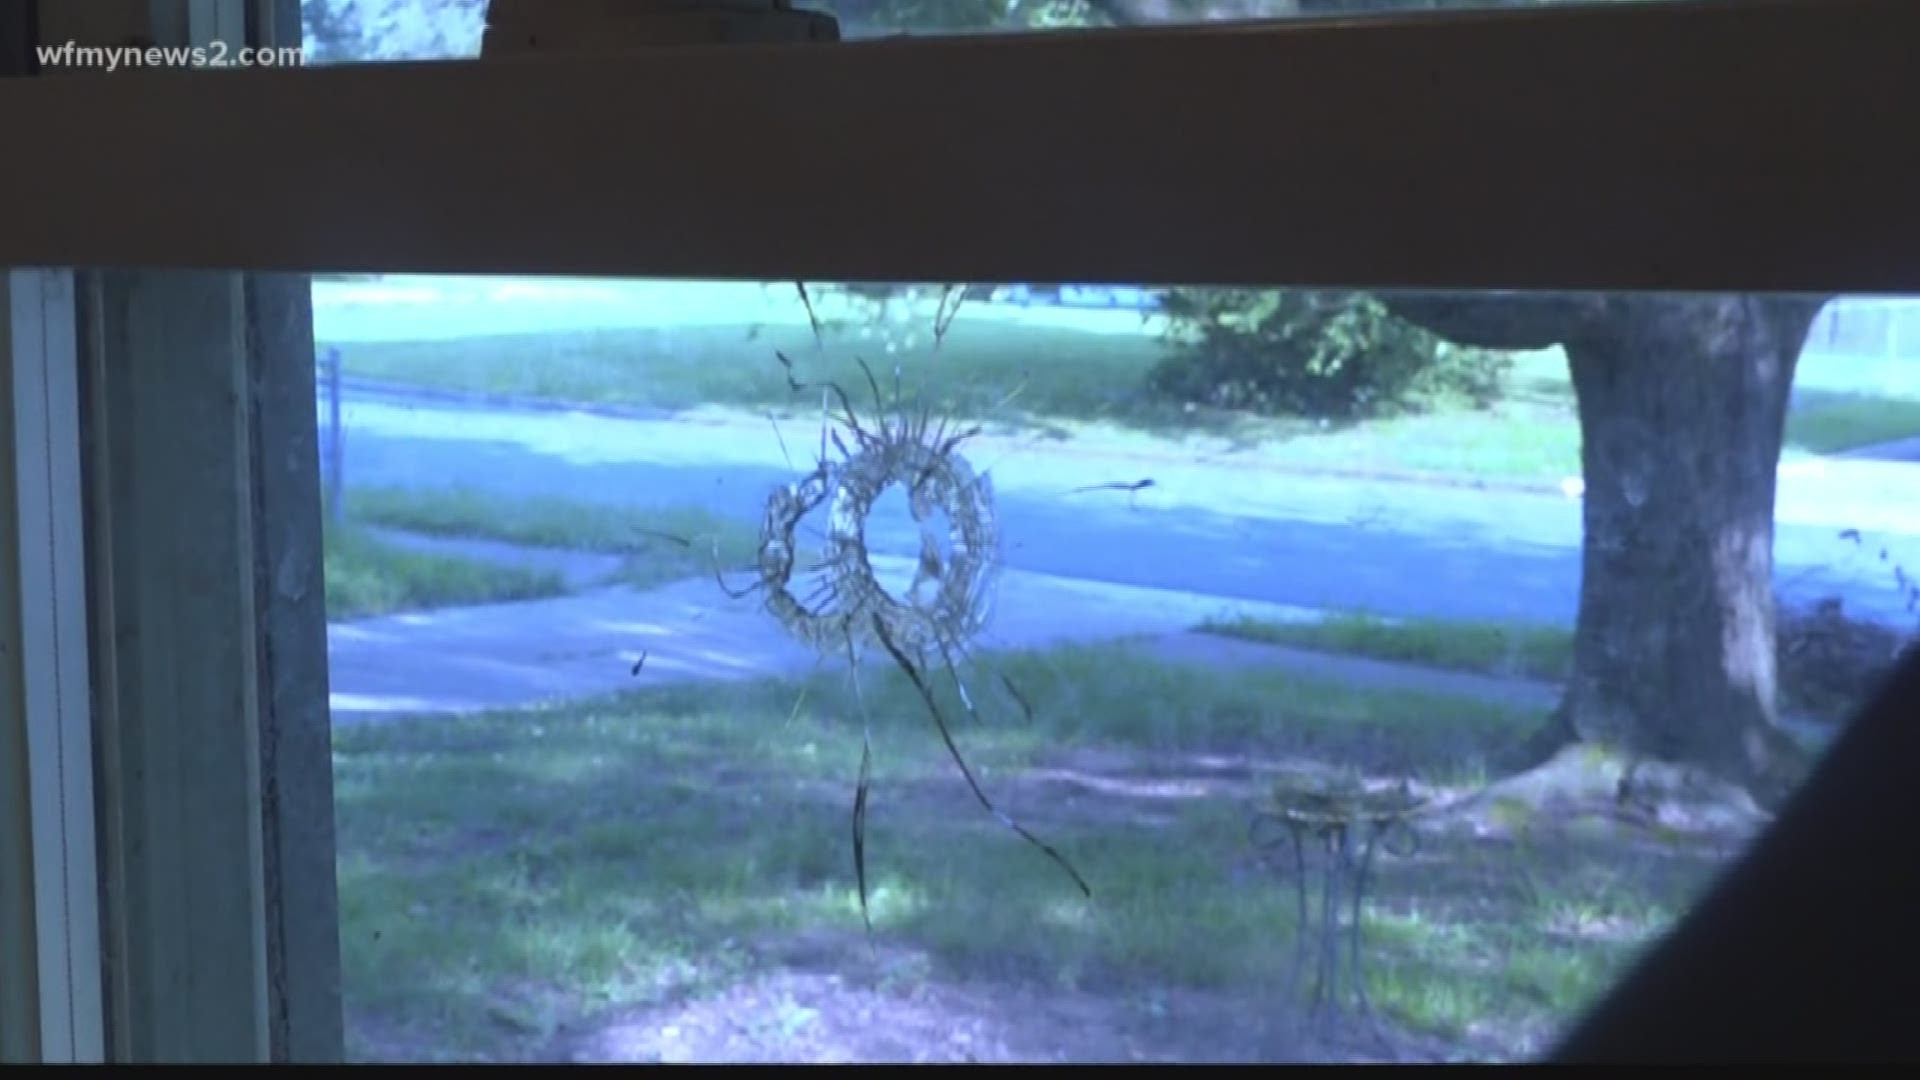 Bullets went through windows, walls and a pillow, Greensboro police said.